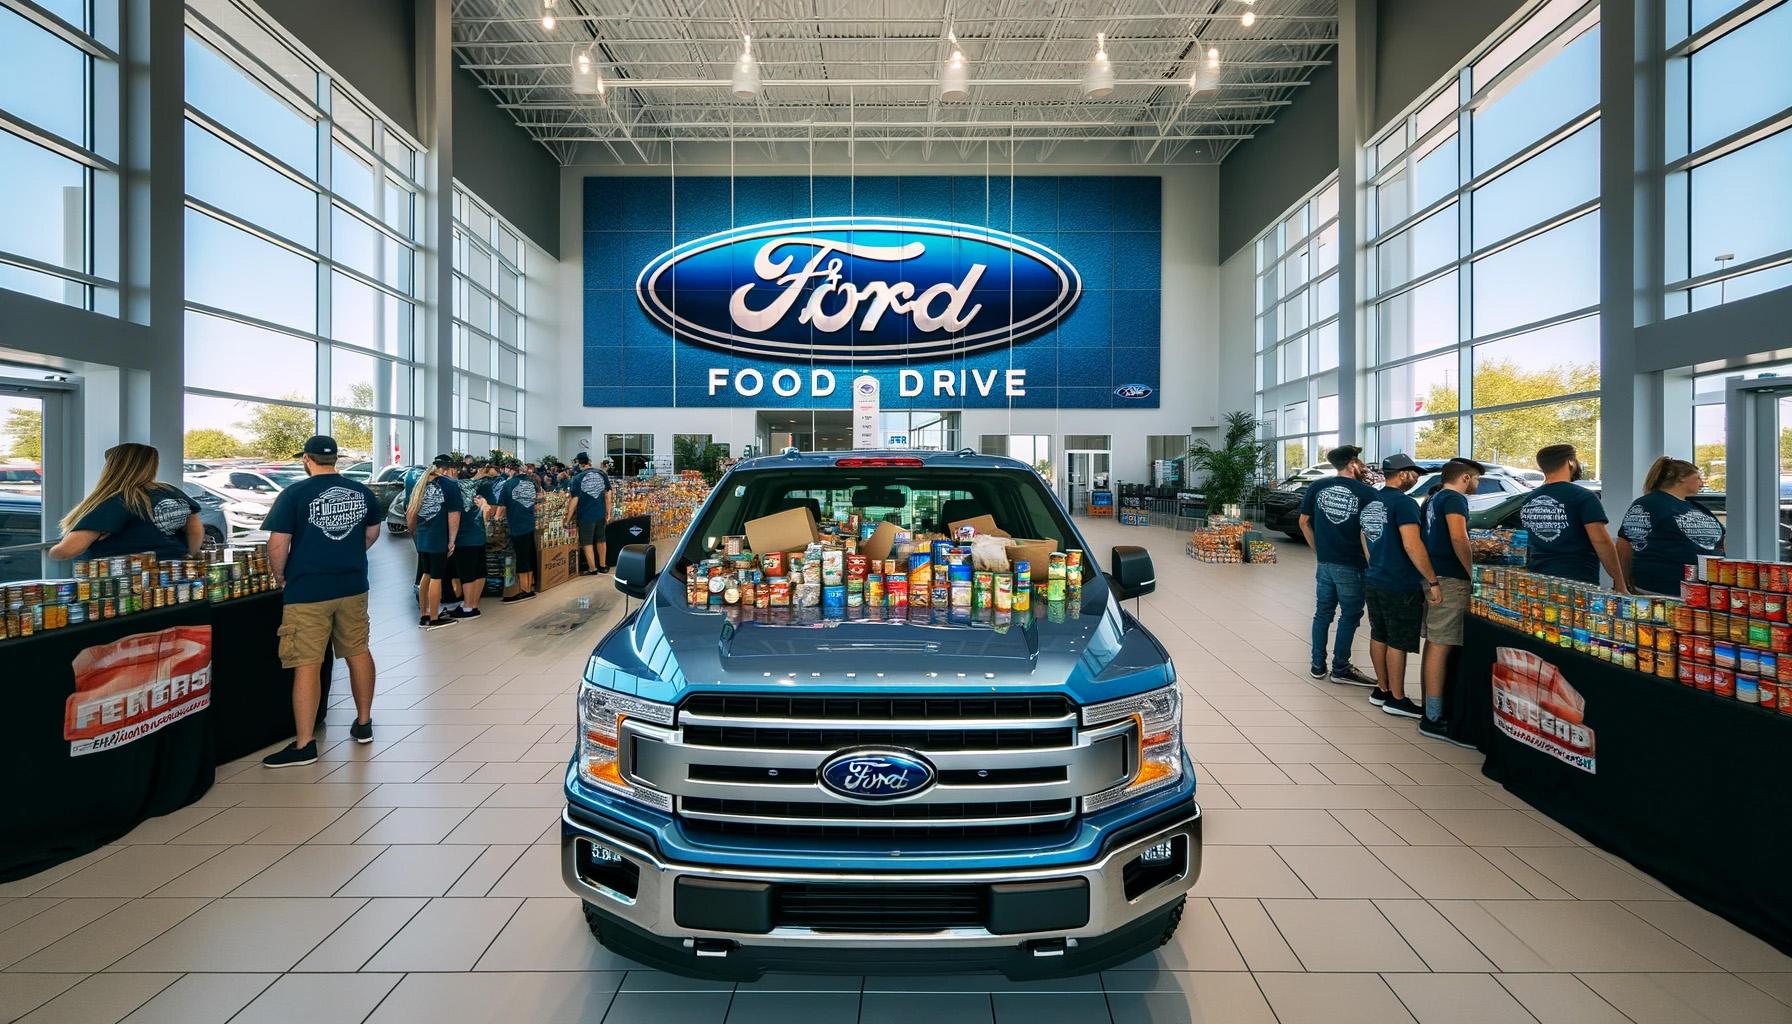 Fill the Ford Food Drive by Pettijohns